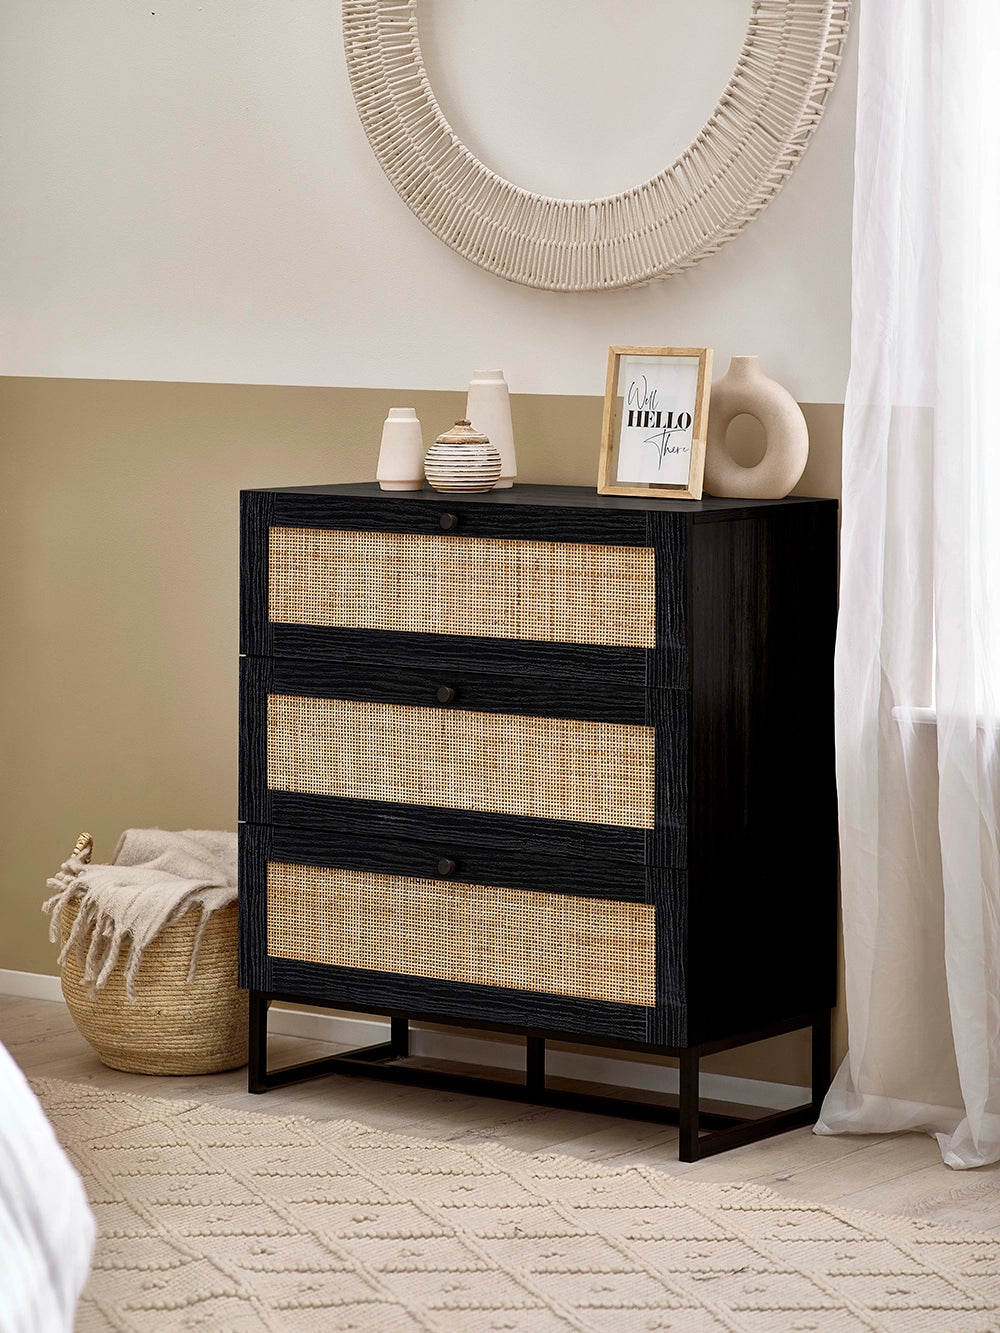 Bari 3 Drawer Chest in Black Finish with Wooden Table Frame and Wicker Basket in Living Room Setting